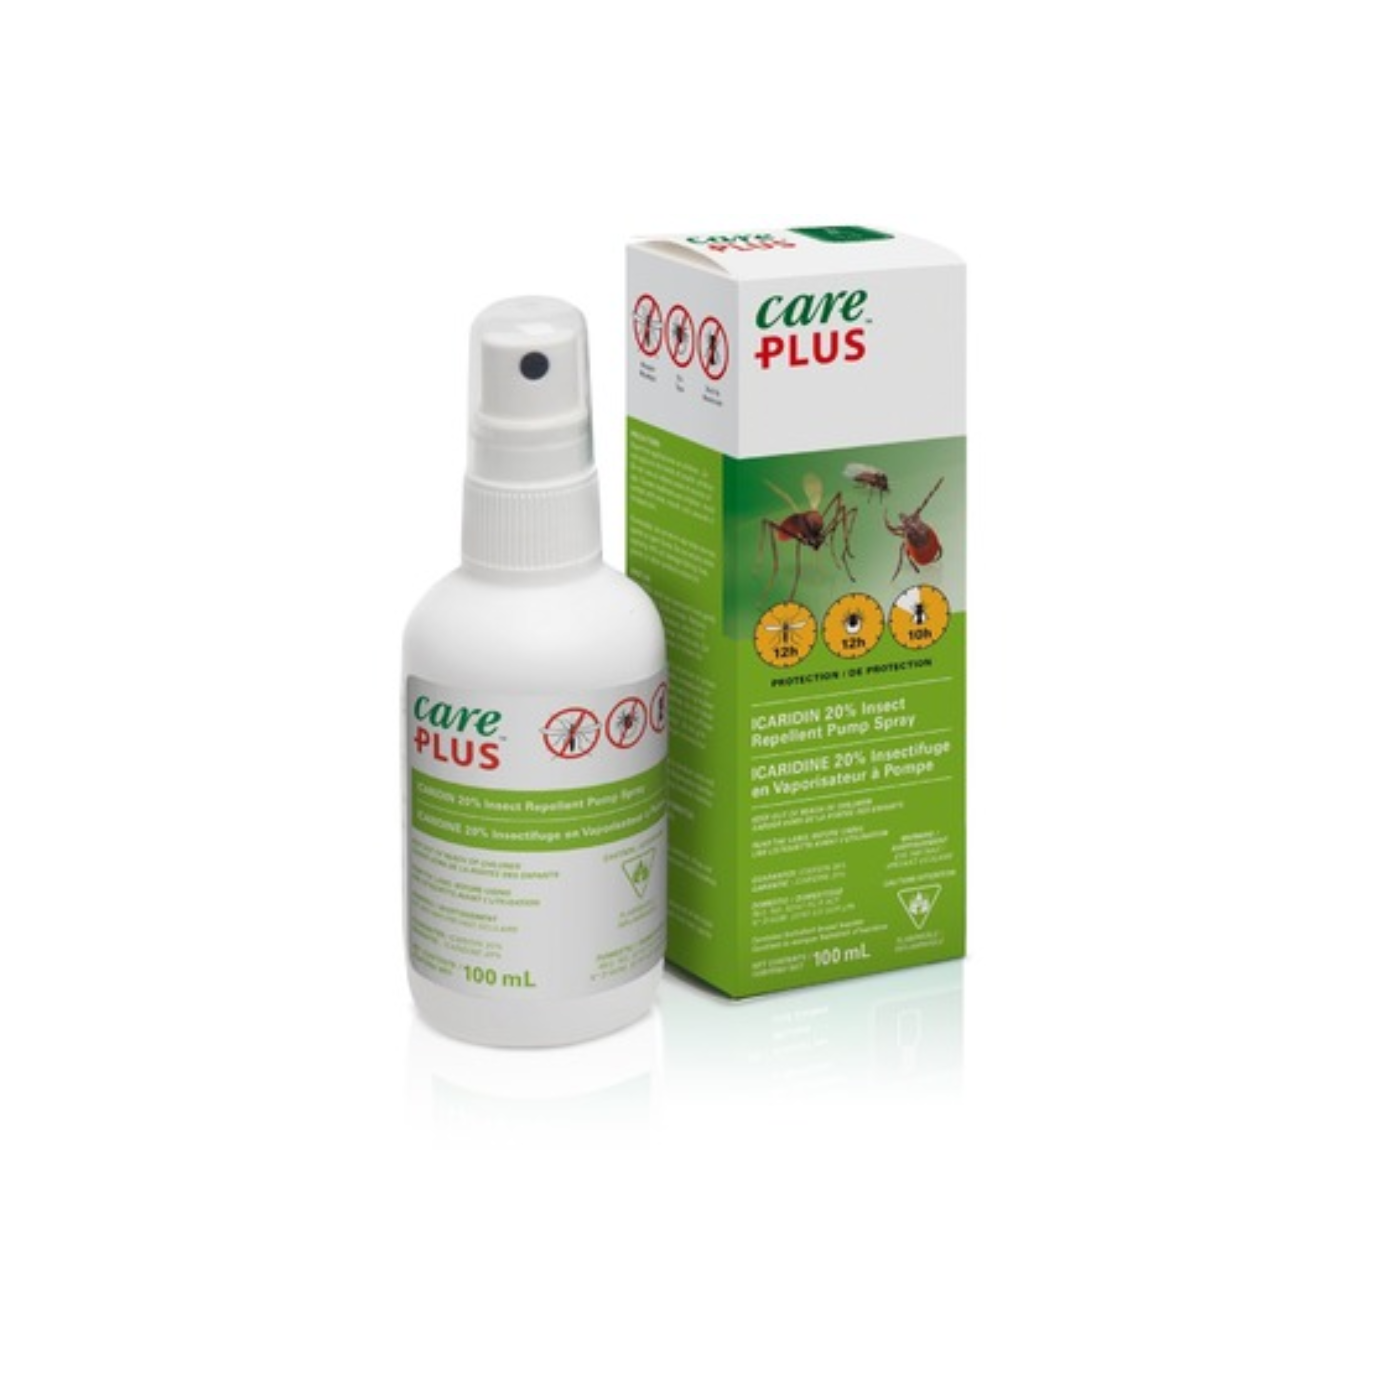 Care Plus Icaridin 20% Deet Free Insect Repellent | 100ml